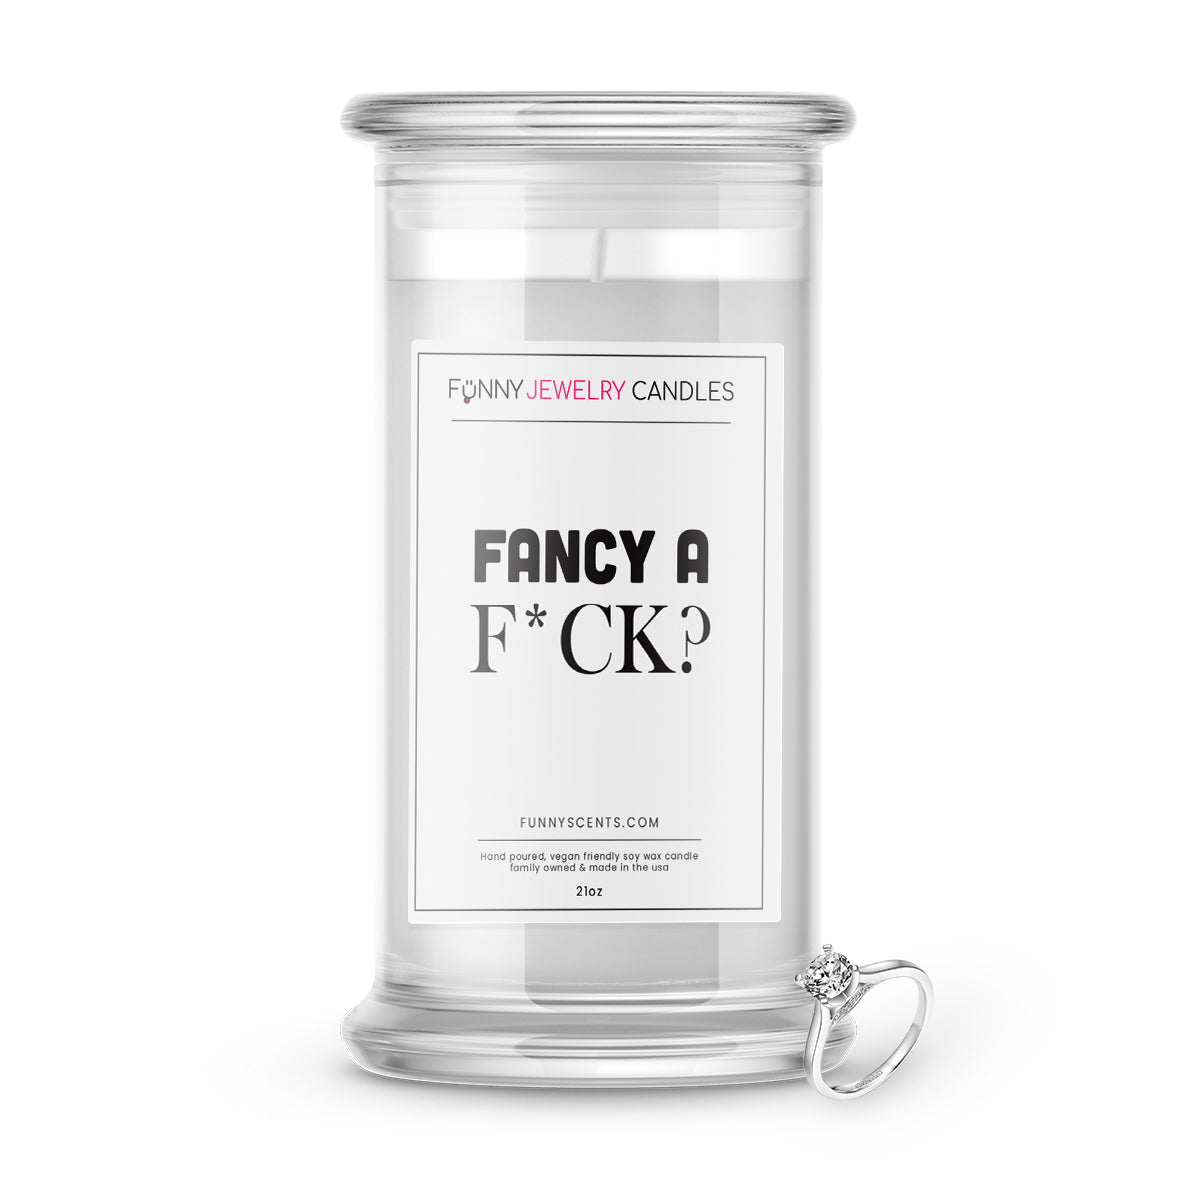 Fancy a F*ck? Jewelry Funny Candles